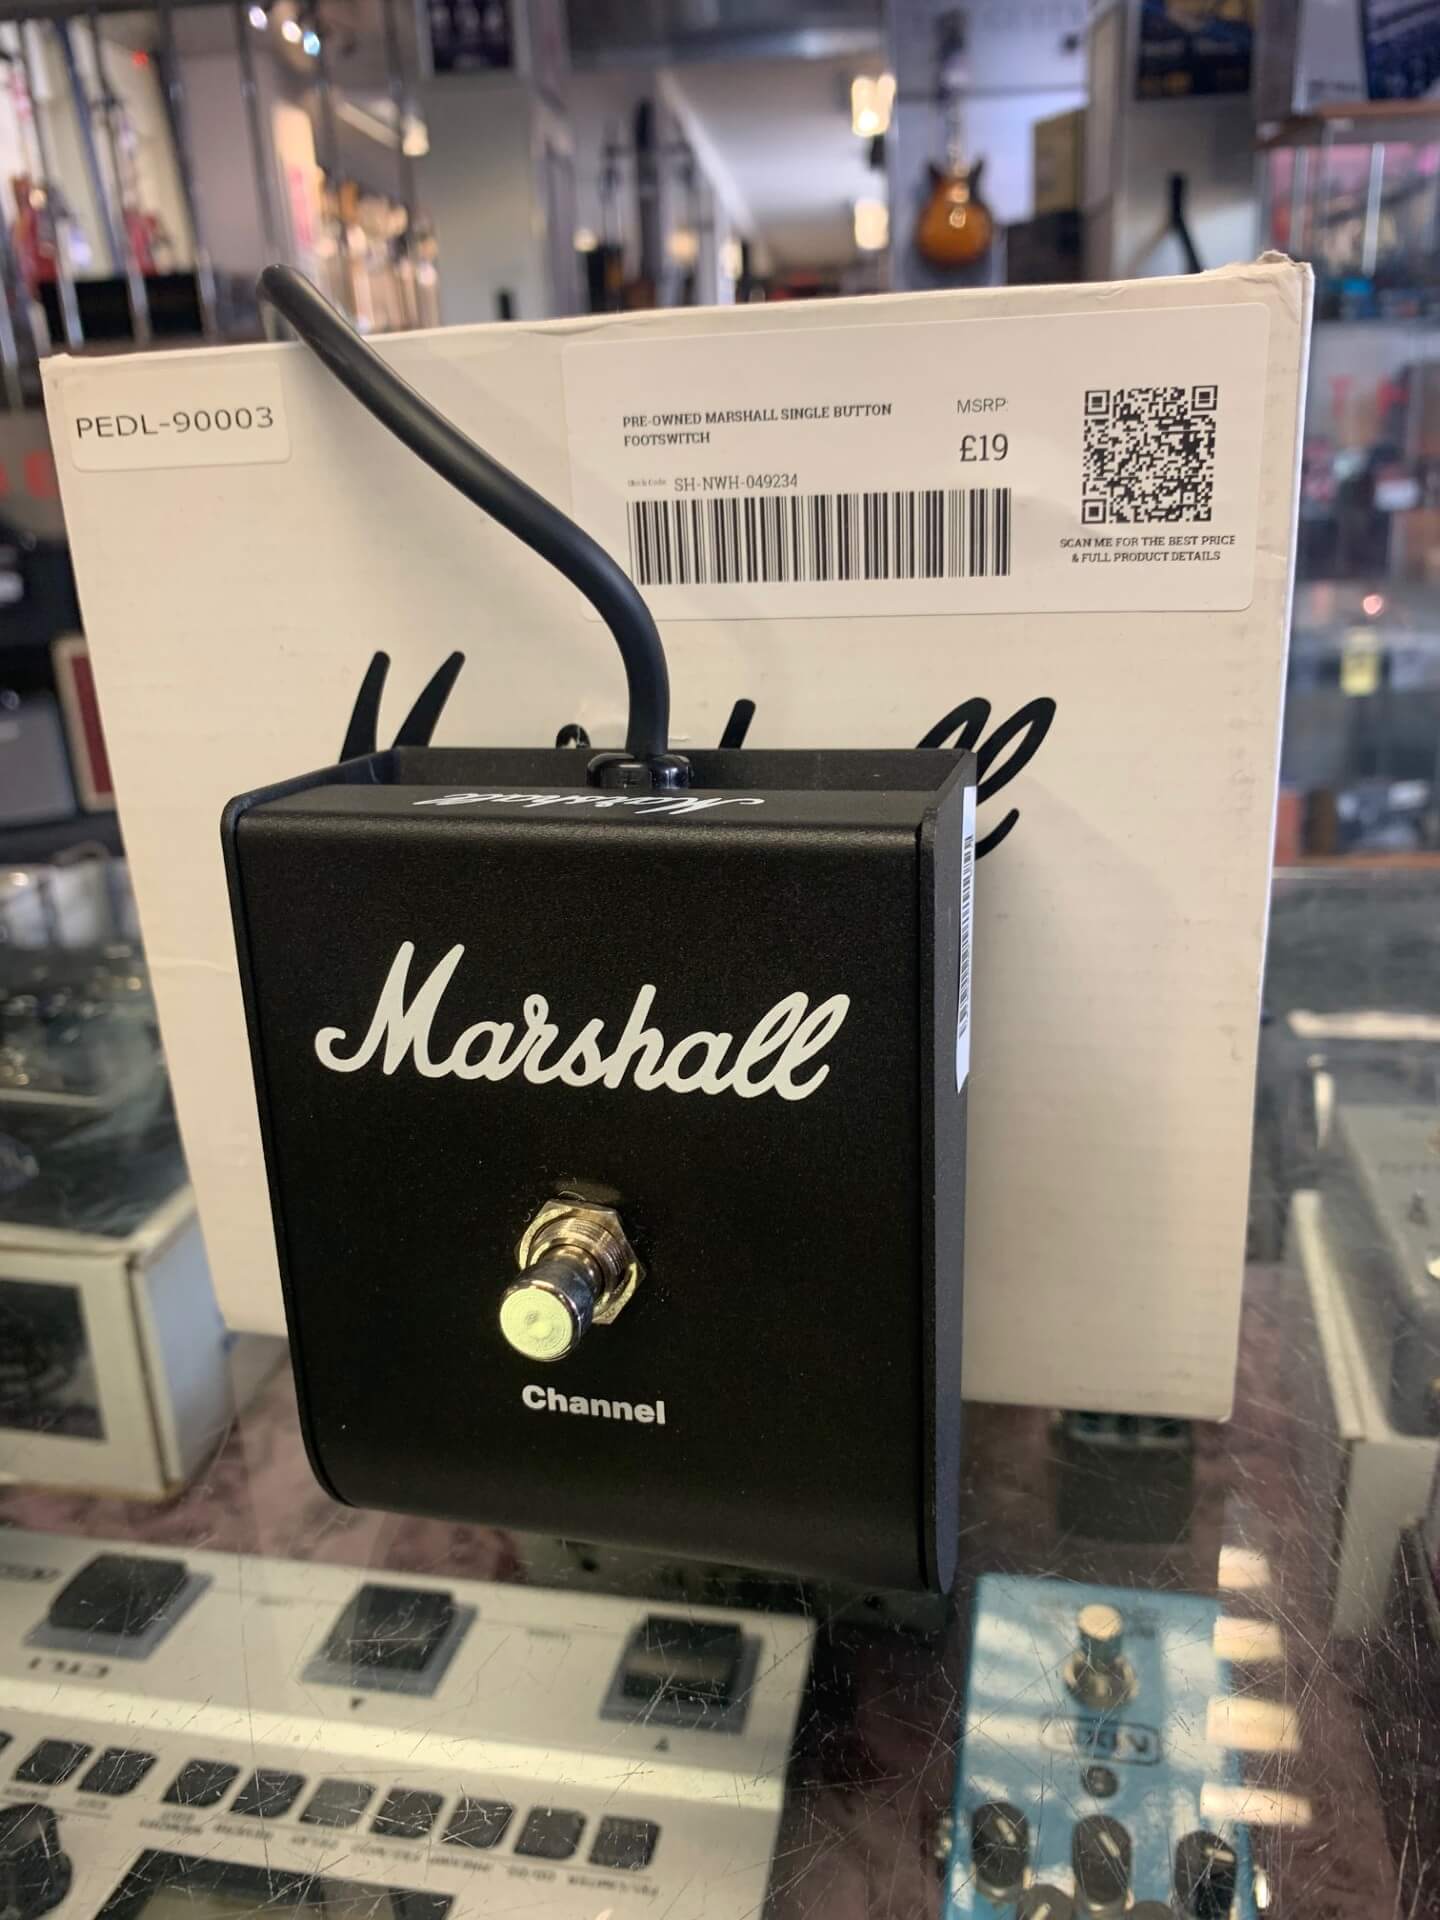 An image of Pre-owned Marshall Single Button Footswi (049234) | PMT Online